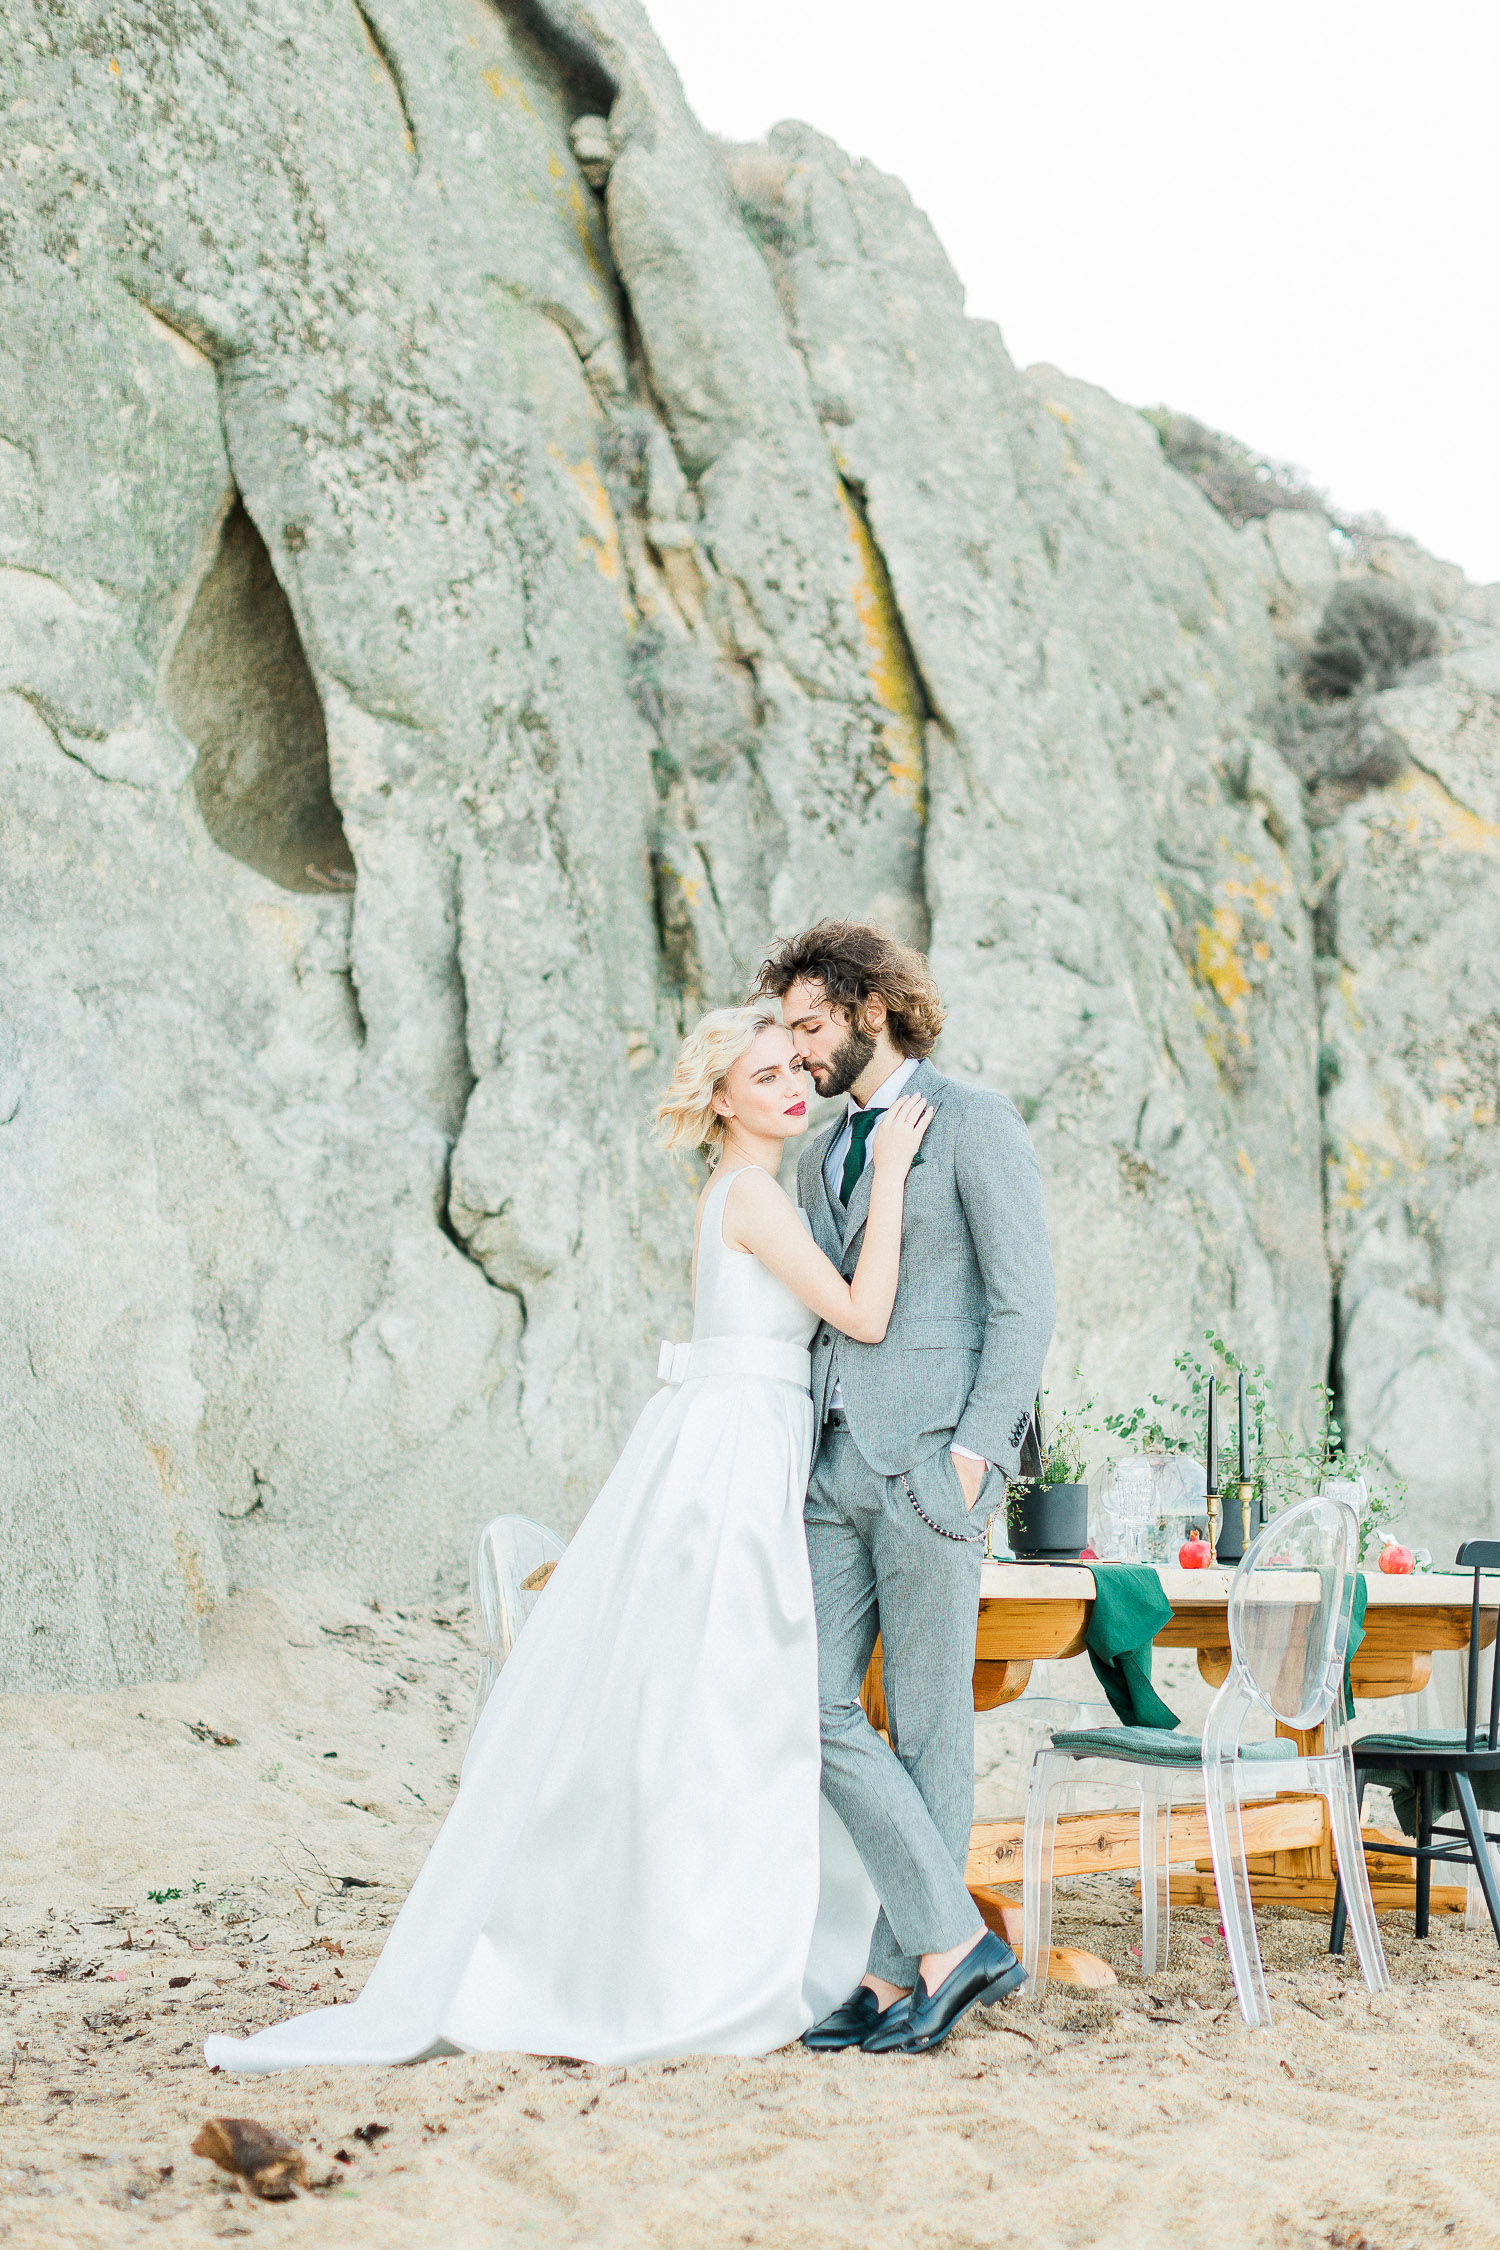 a romantic couple portrait on a rocky beach elopement at in Greece